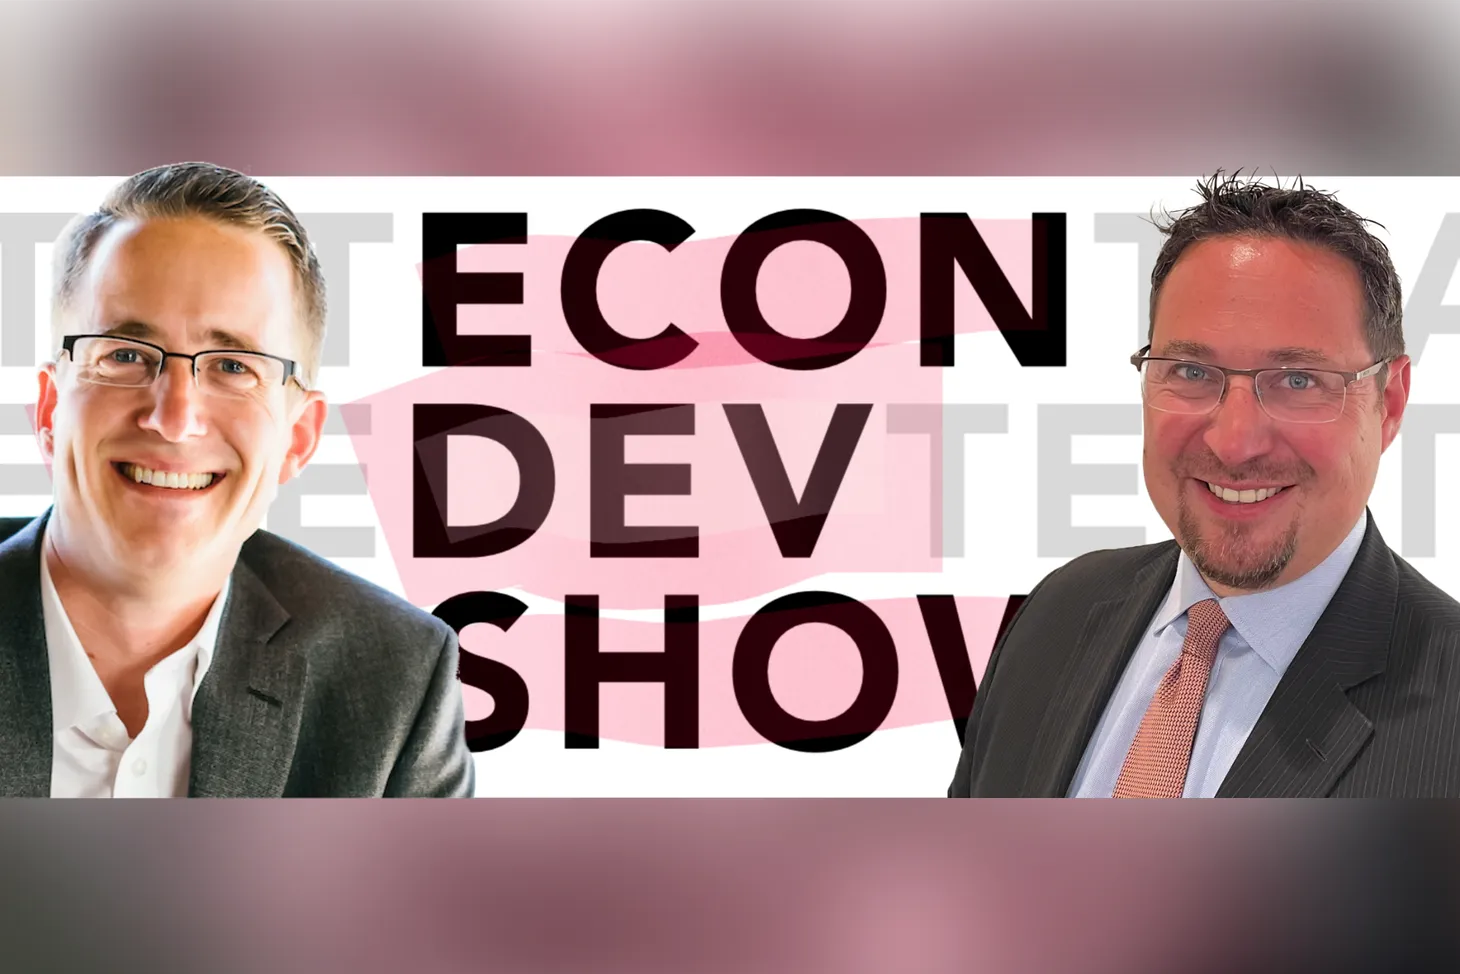 Podcast Episode #131: Economic Analytics Made Easy: Eric Trevan's Innovative Approach